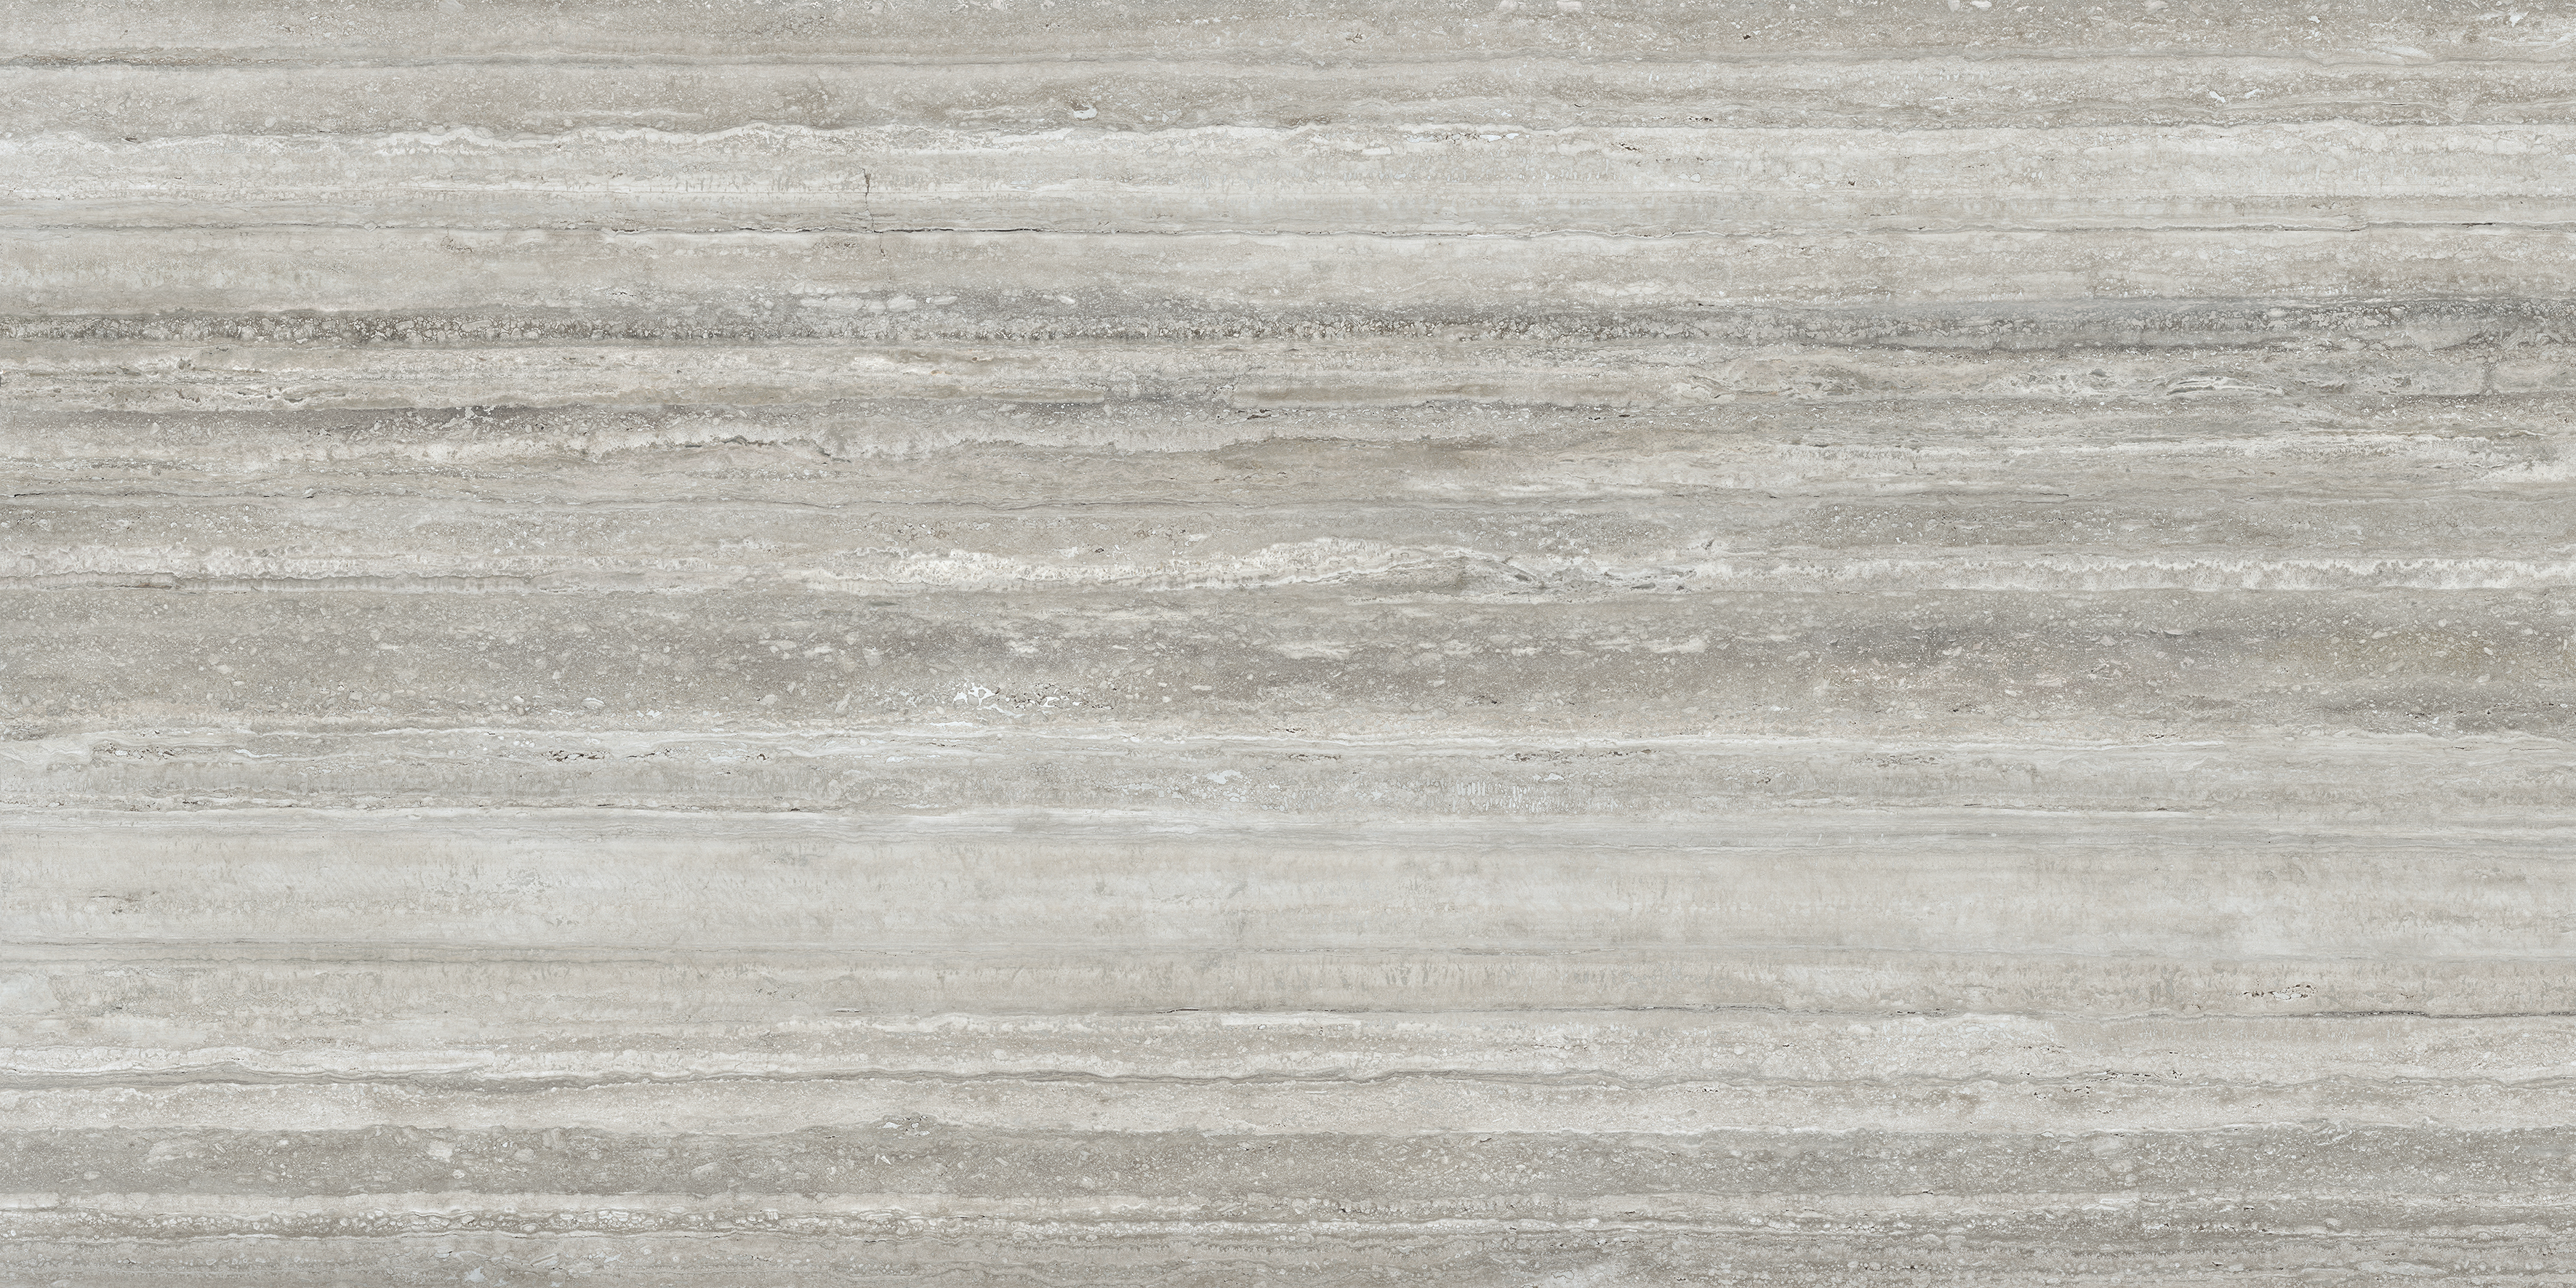 travertino instrata pattern glazed porcelain field tile from la marca anatolia collection distributed by surface group international honed finish rectified edge 12x24 rectangle shape